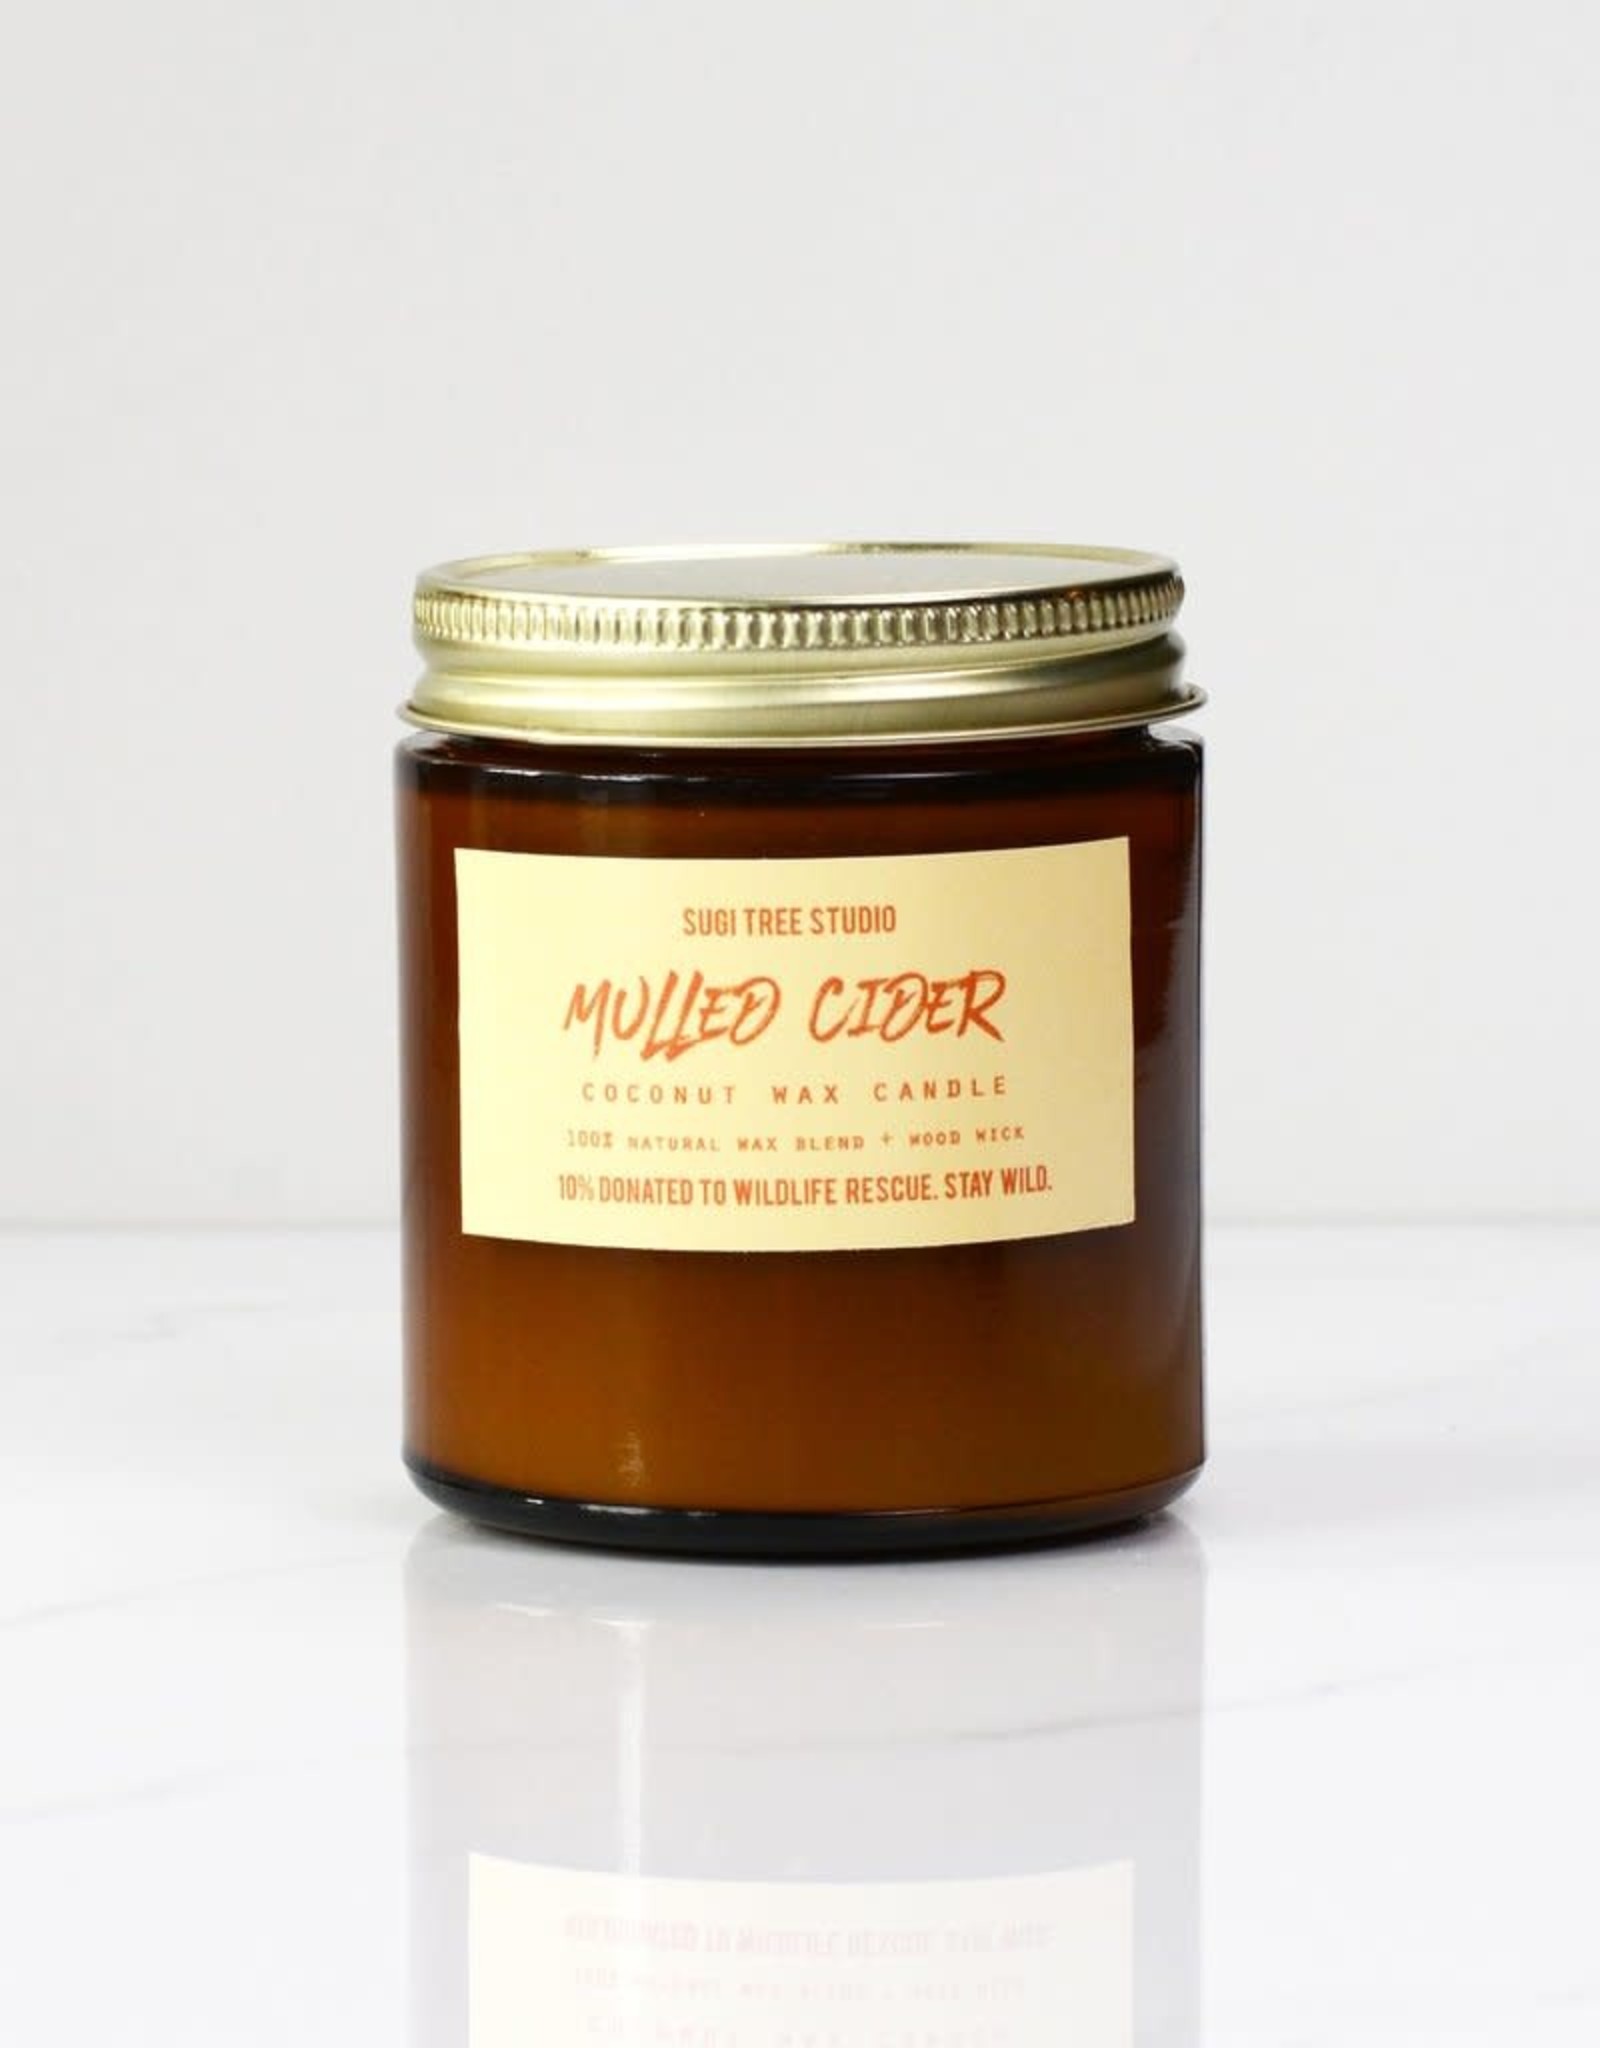 Sugi tree studio Wood Wick Candle - Mulled Cider